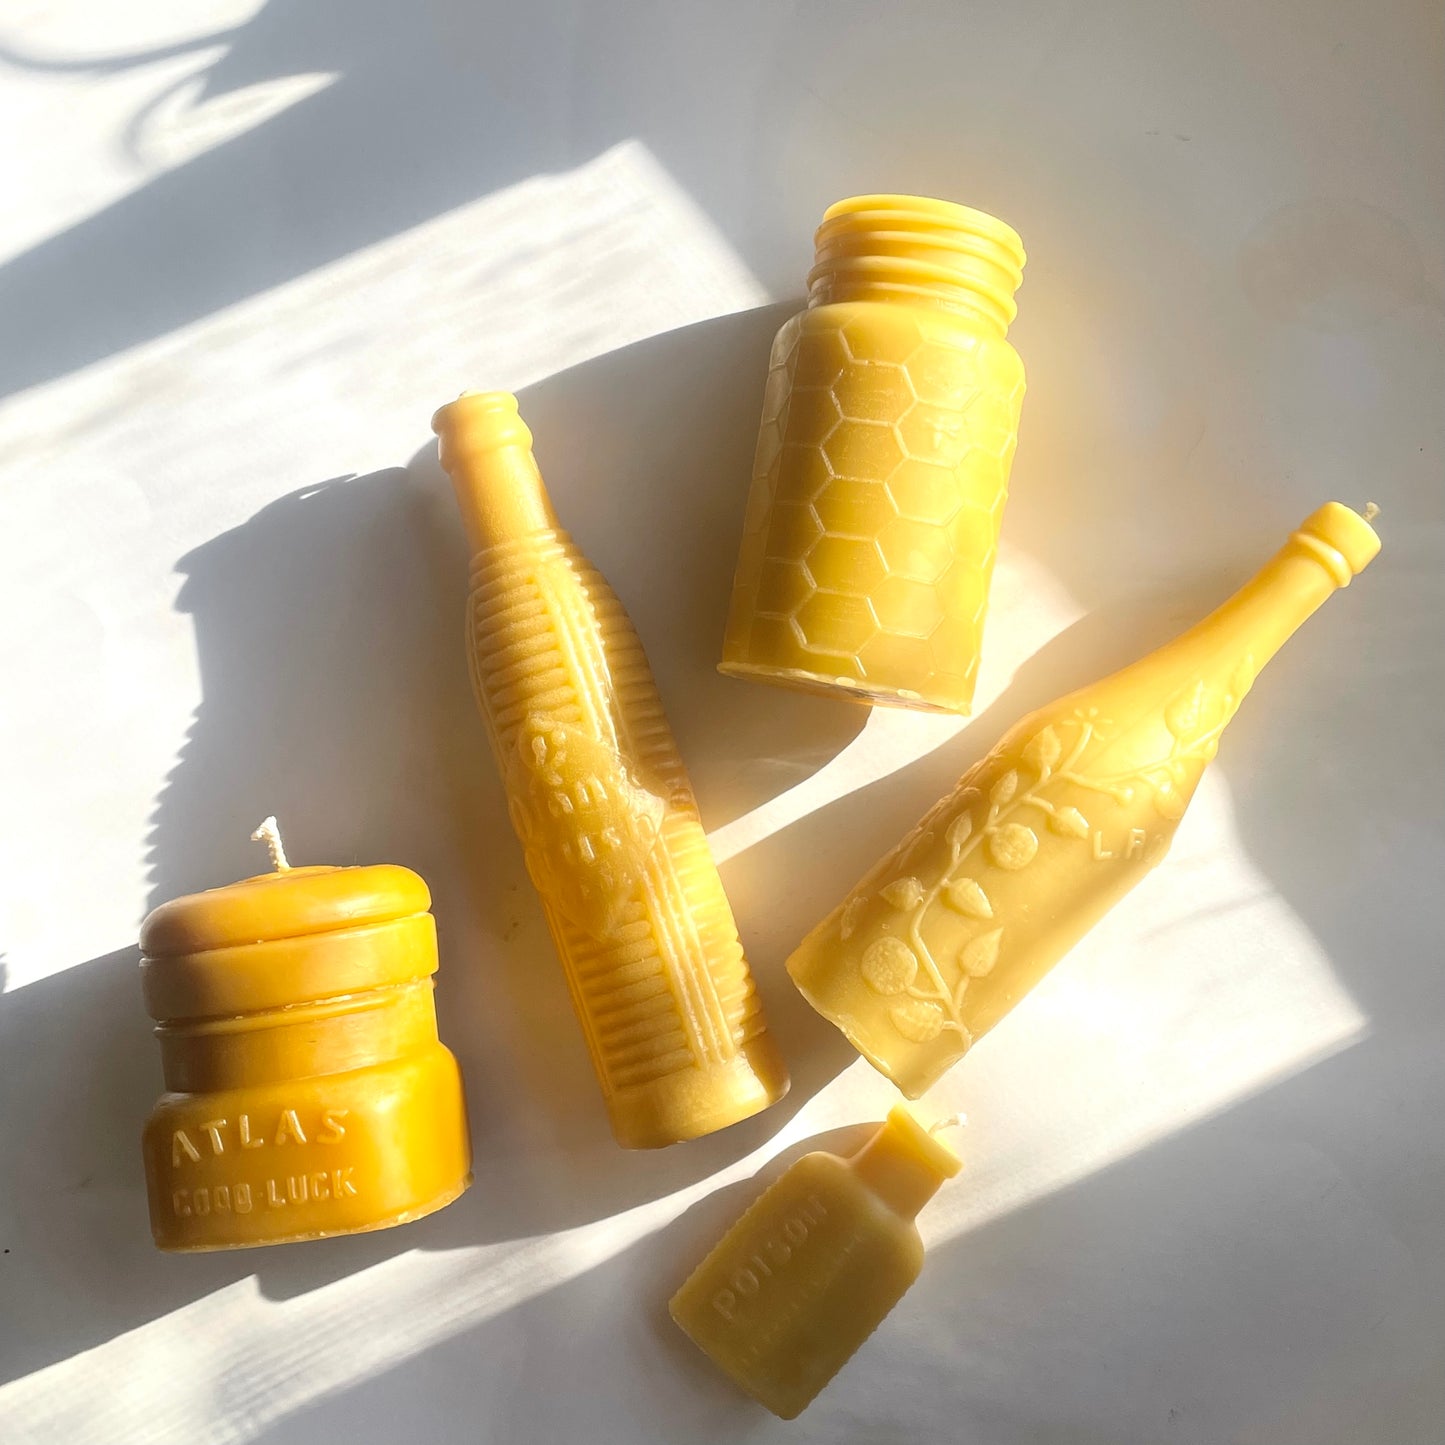 Vintage Beeswax Bottle Candles - Candles, Beeswax - from Antique Bottle Molds